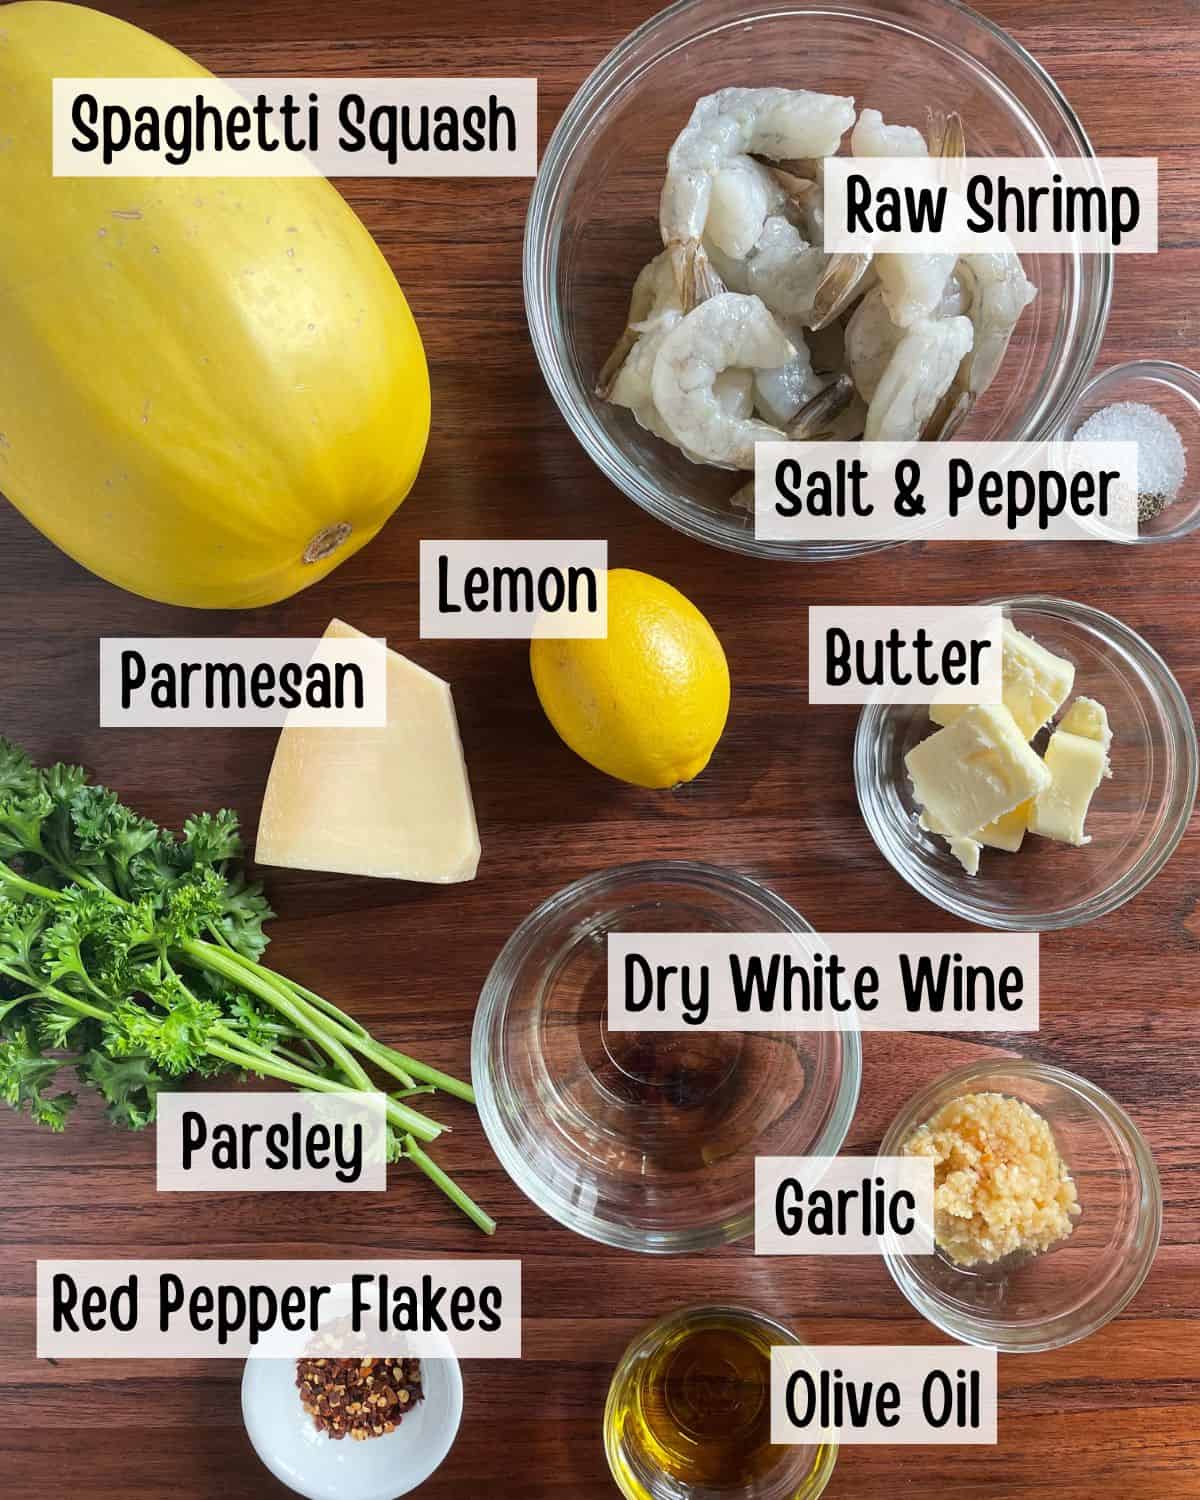 Ingredients needed to make grilled spaghetti squash and shrimp scampi.